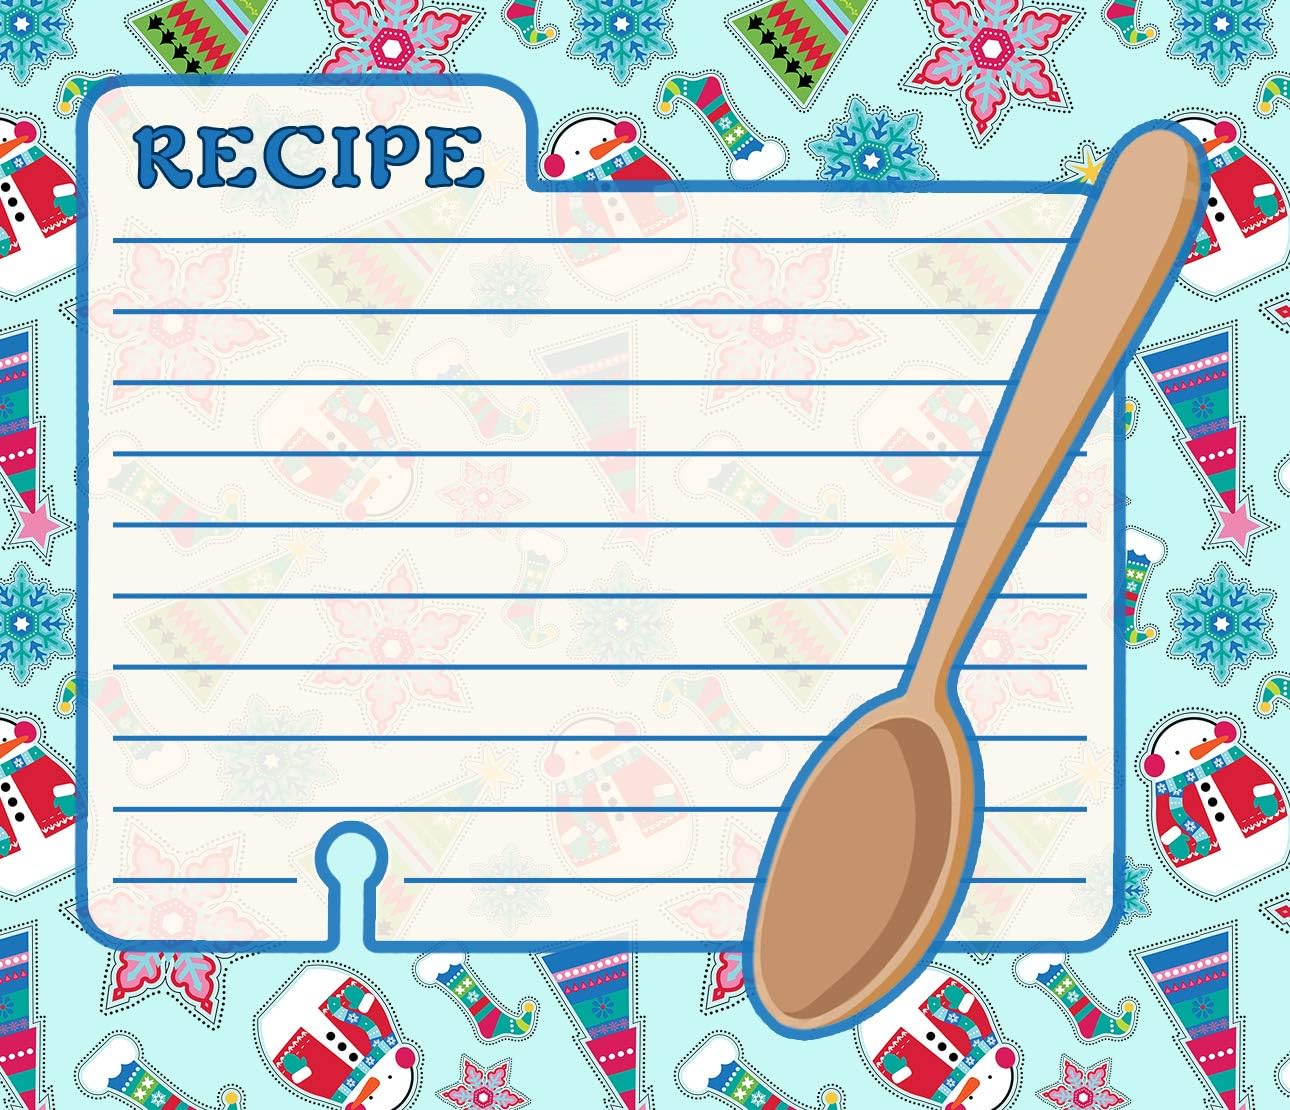 Christmas - Holiday Baking Kitchen Linen Set (6 Piece) - 2 Kitchen Towel, 2 Pot Holders, 1 Oven Mitt, 1 Magnetic Dry Erase Recipe Planner (Style 01)